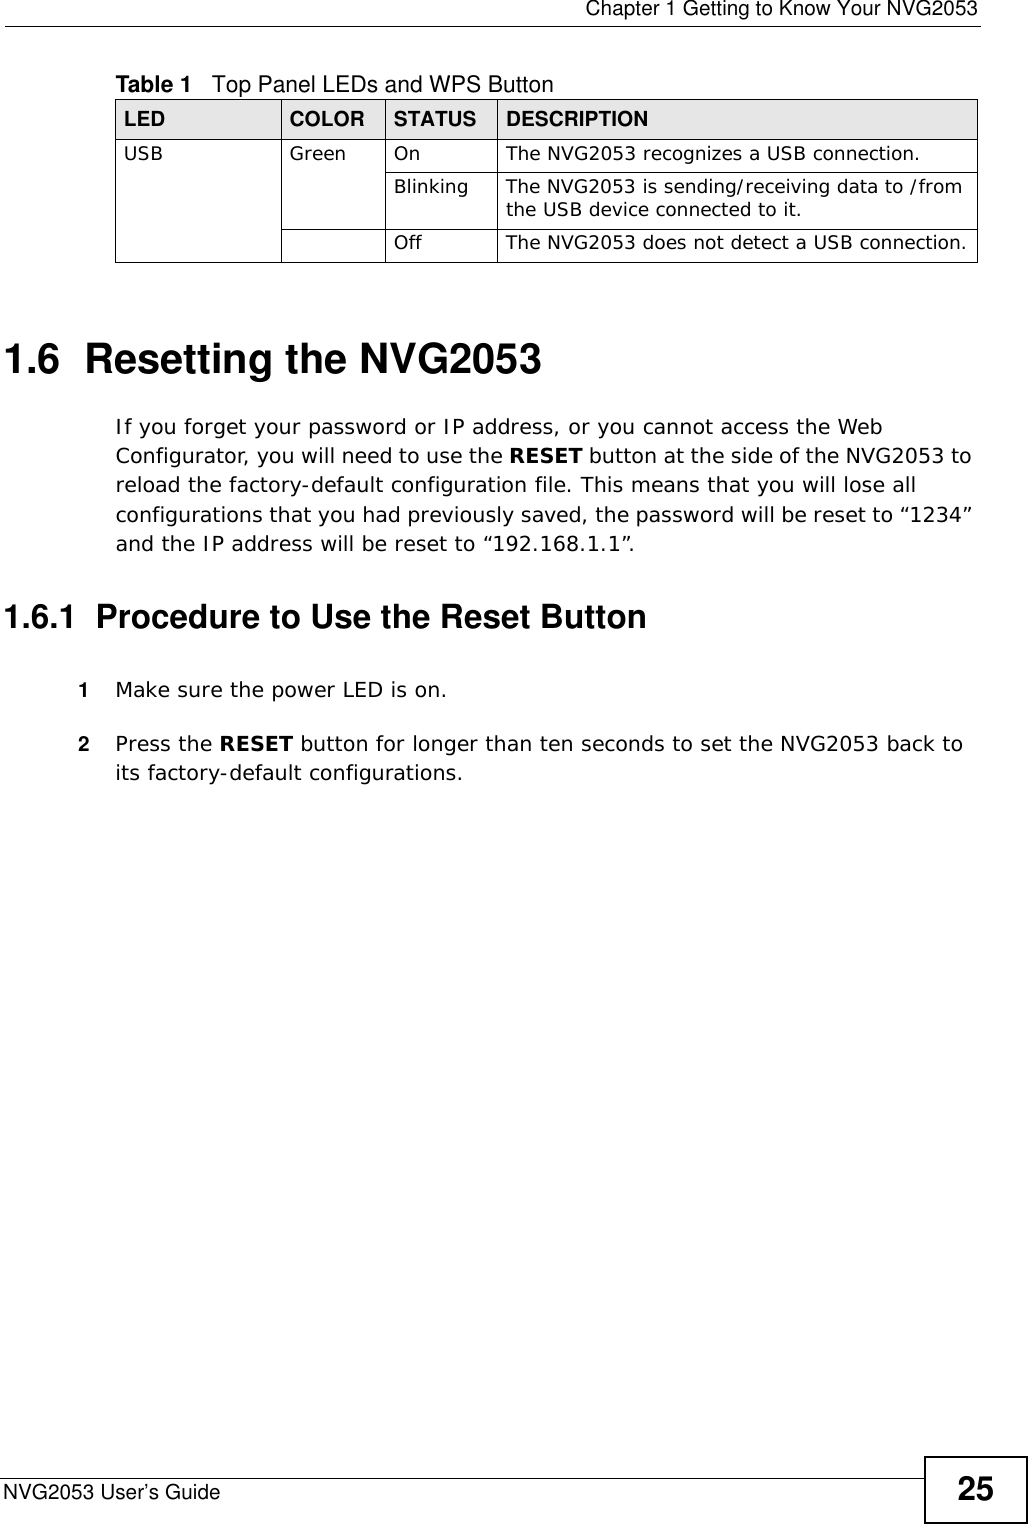  Chapter 1 Getting to Know Your NVG2053NVG2053 User’s Guide 251.6  Resetting the NVG2053If you forget your password or IP address, or you cannot access the Web Configurator, you will need to use the RESET button at the side of the NVG2053 to reload the factory-default configuration file. This means that you will lose all configurations that you had previously saved, the password will be reset to “1234” and the IP address will be reset to “192.168.1.1”.1.6.1  Procedure to Use the Reset Button1Make sure the power LED is on.2Press the RESET button for longer than ten seconds to set the NVG2053 back to its factory-default configurations.USB Green On The NVG2053 recognizes a USB connection.Blinking The NVG2053 is sending/receiving data to /from the USB device connected to it.Off The NVG2053 does not detect a USB connection.Table 1   Top Panel LEDs and WPS ButtonLED COLOR STATUS DESCRIPTION